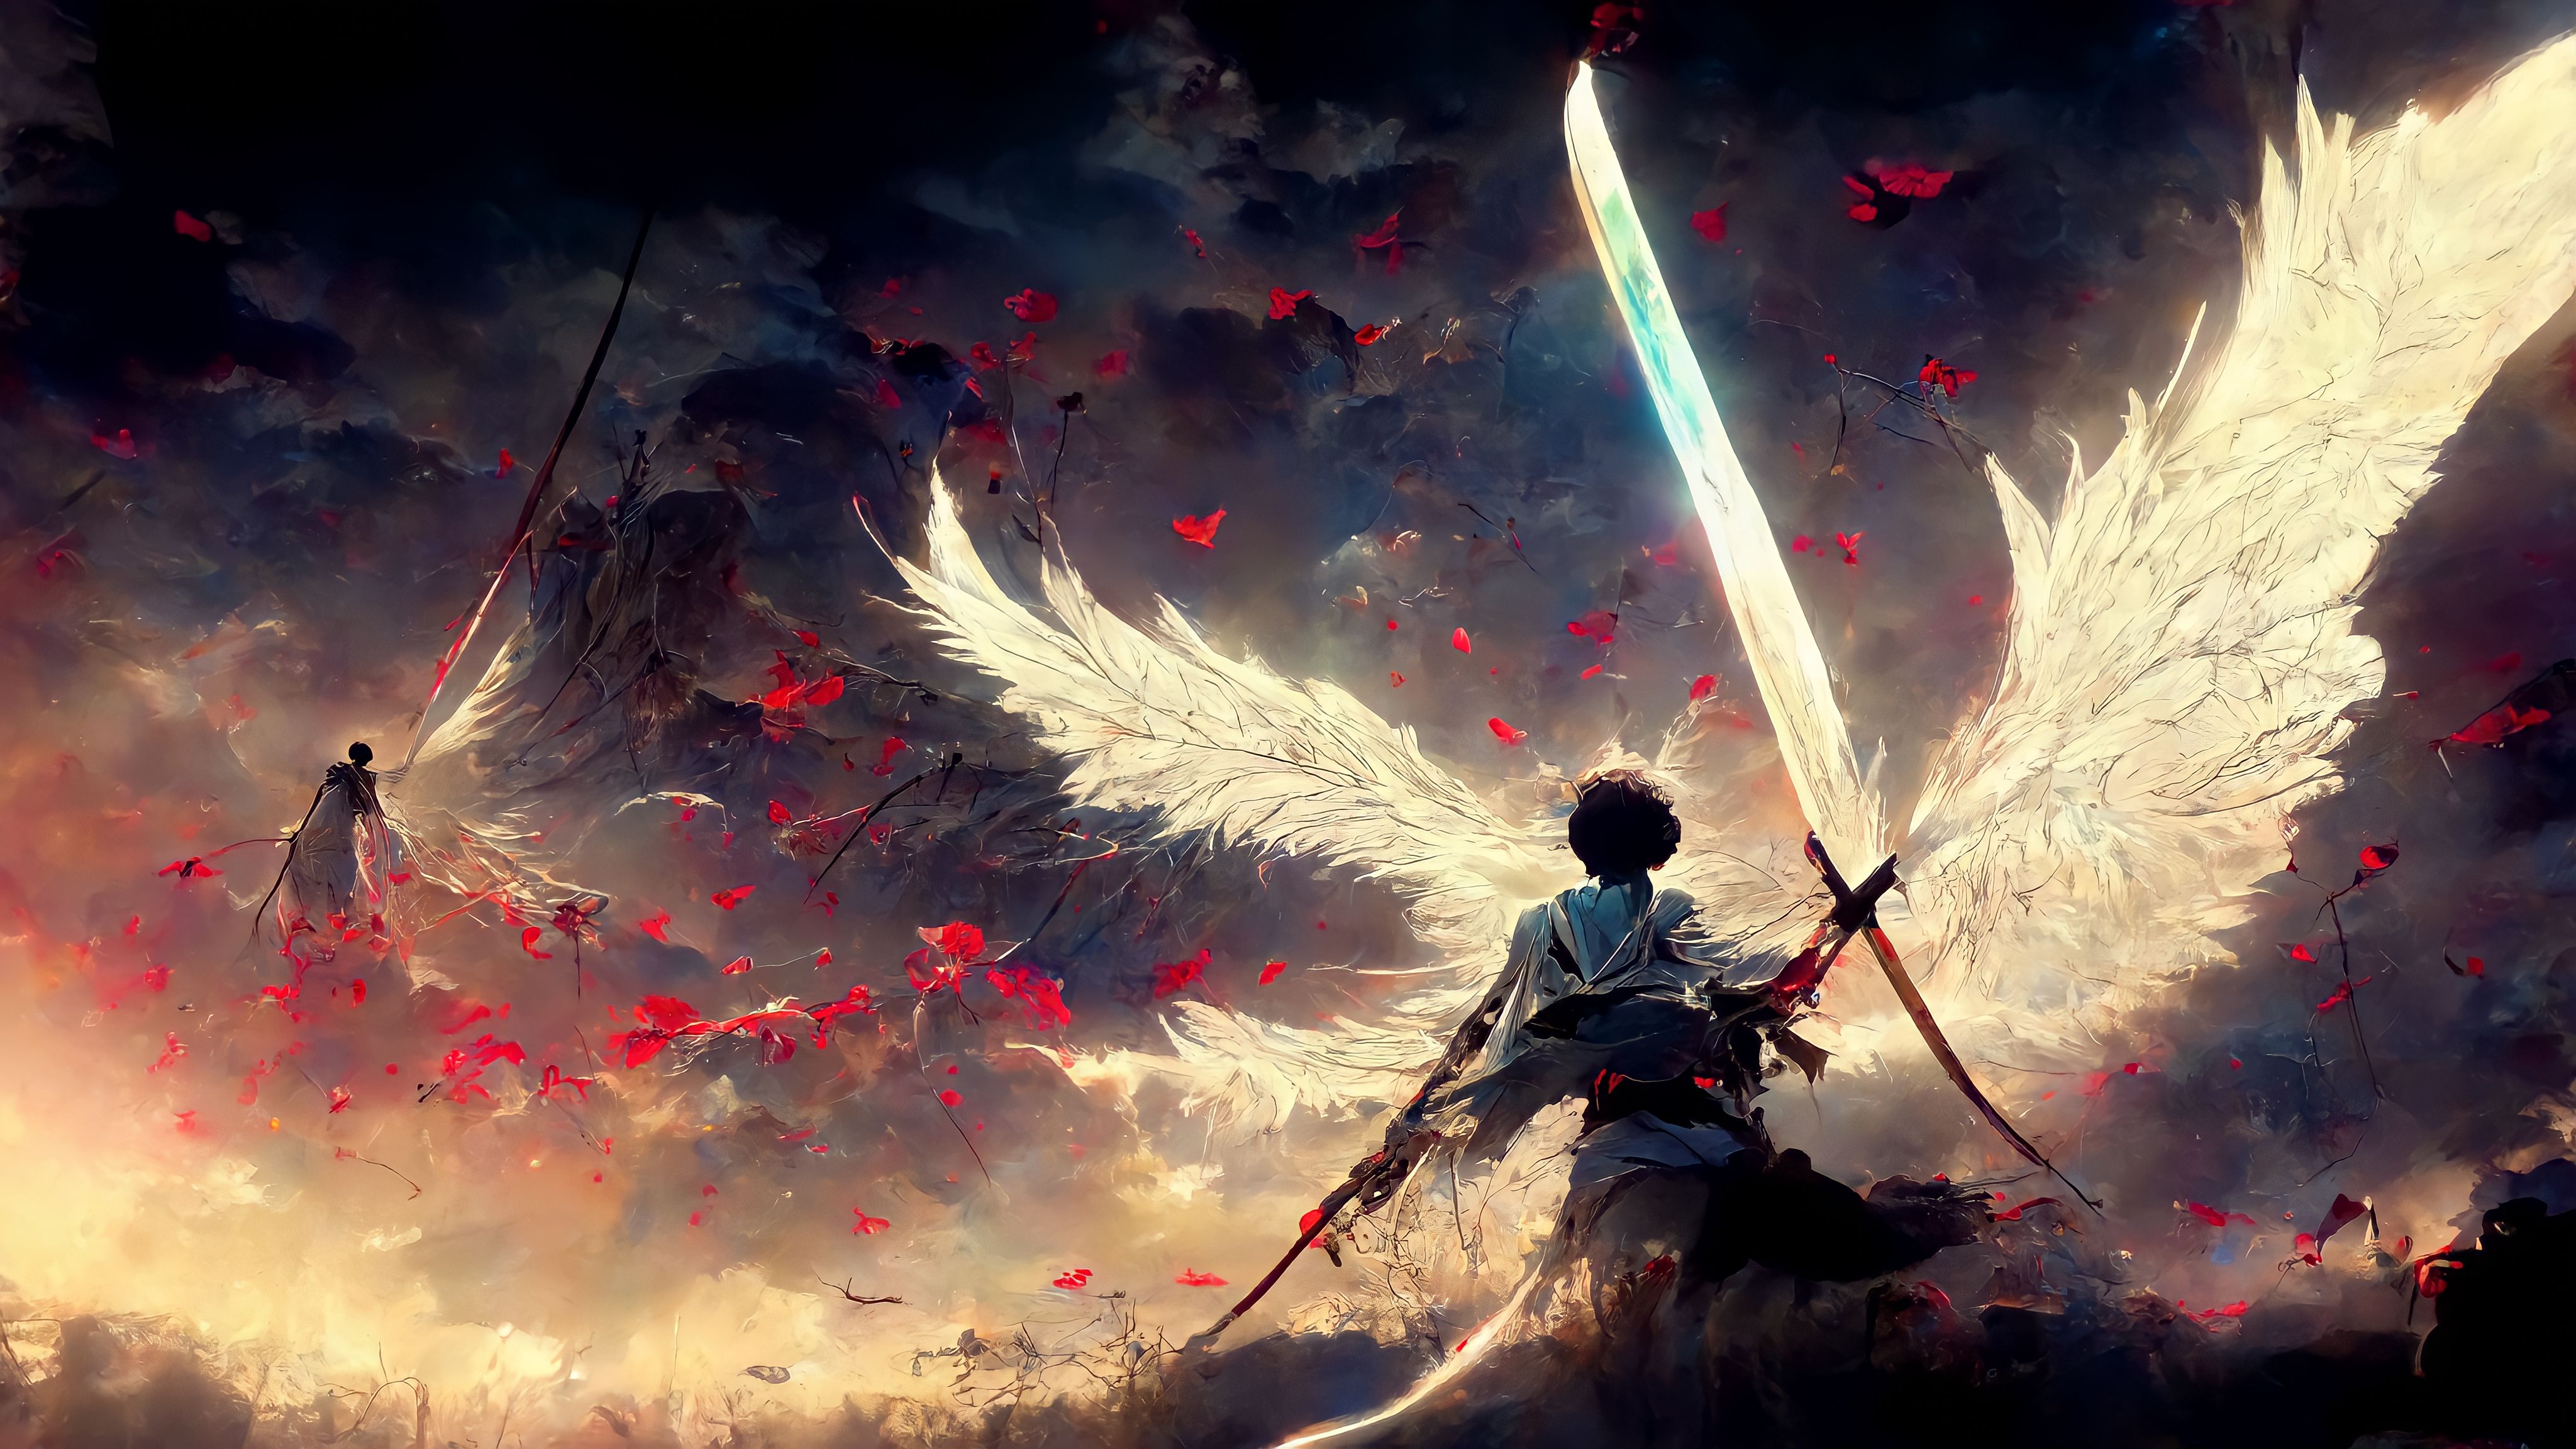 55+ Epic Anime Wallpapers HD